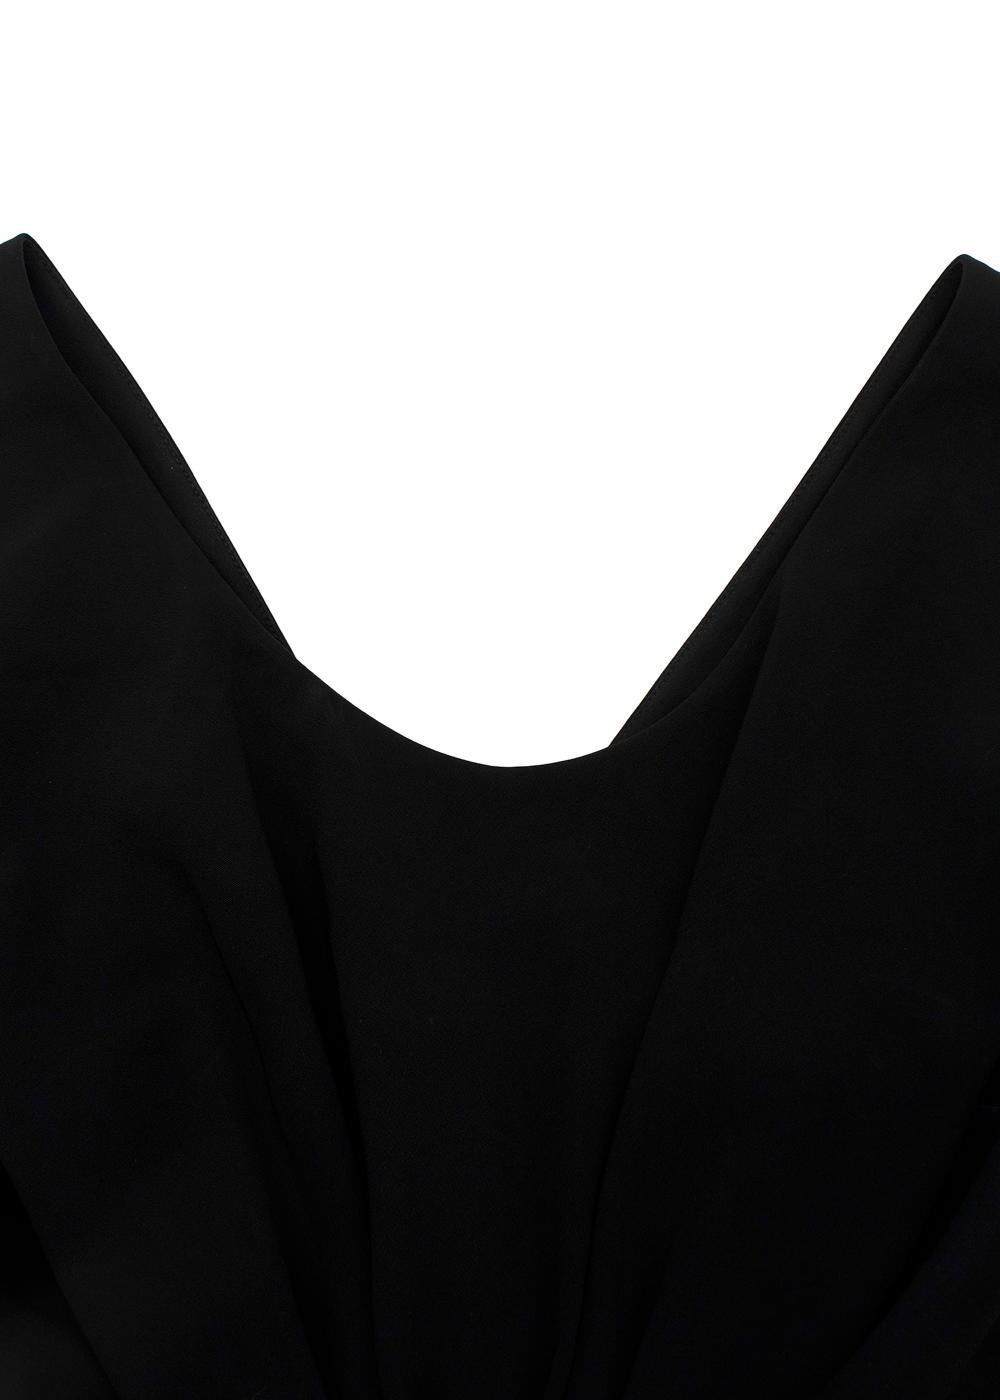 Black Crepe V-Back Dress In New Condition For Sale In London, GB